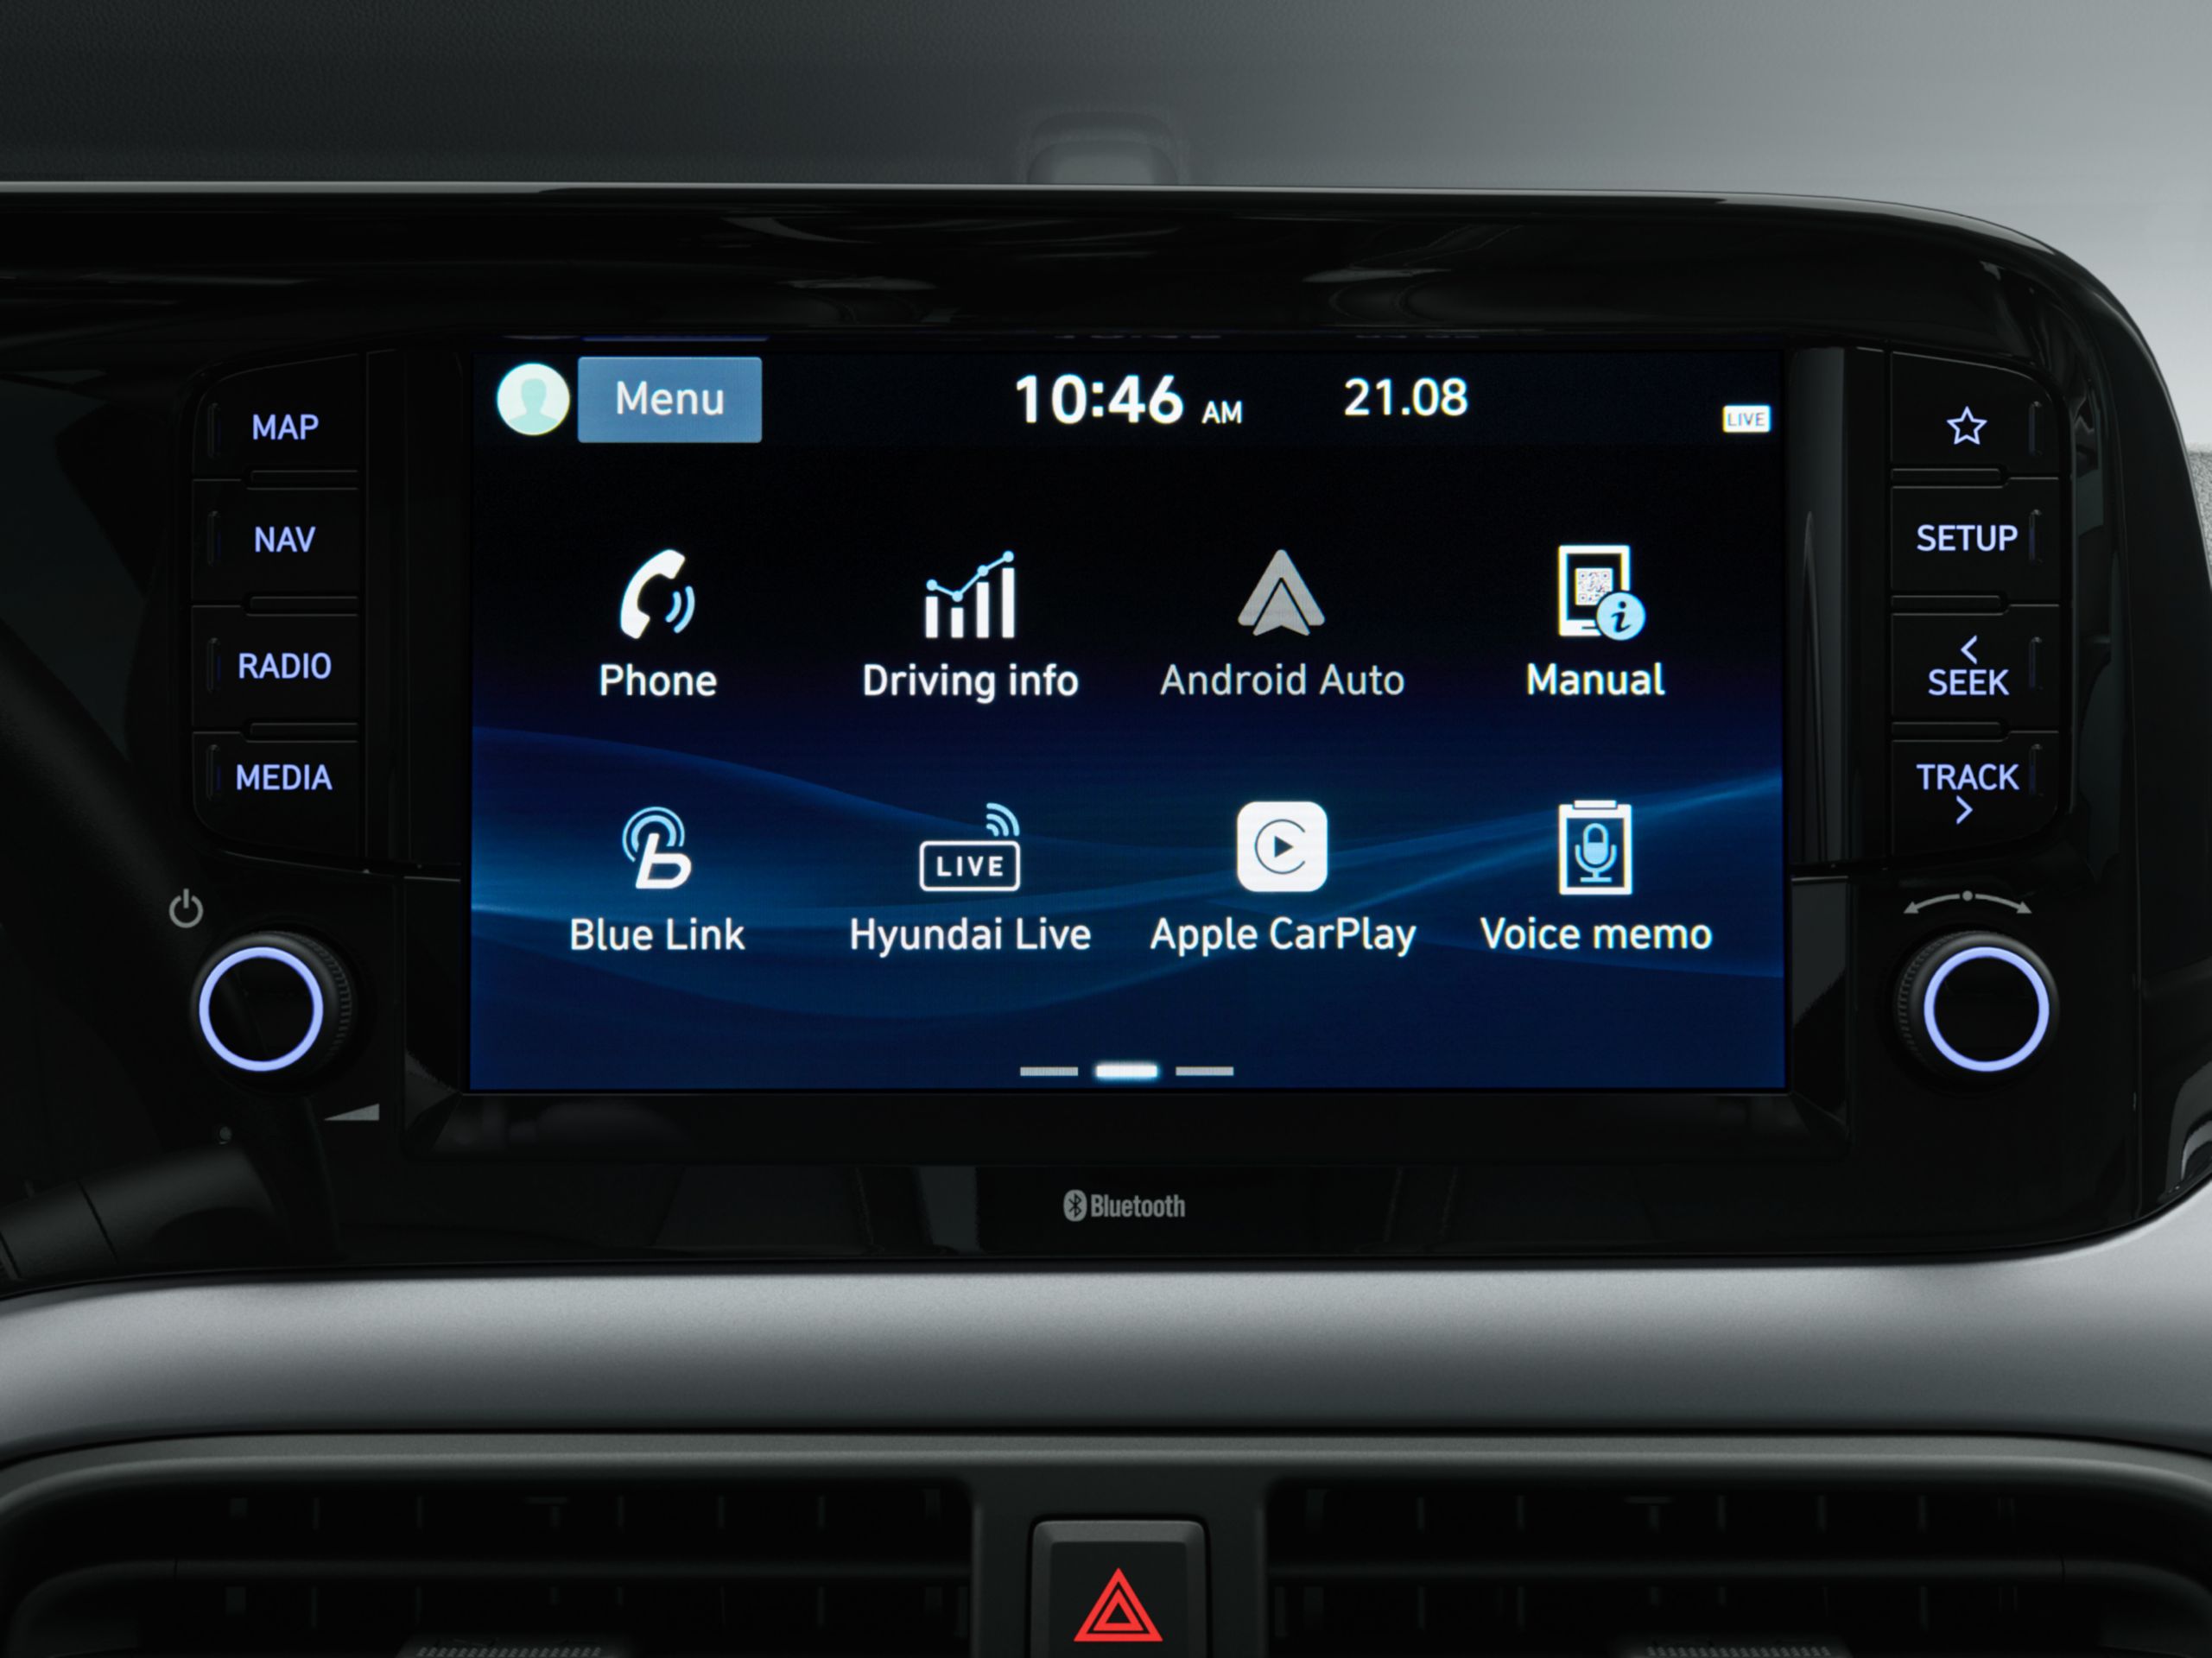 Close up view of the 8 inch touch screen in the Hyundai i10.